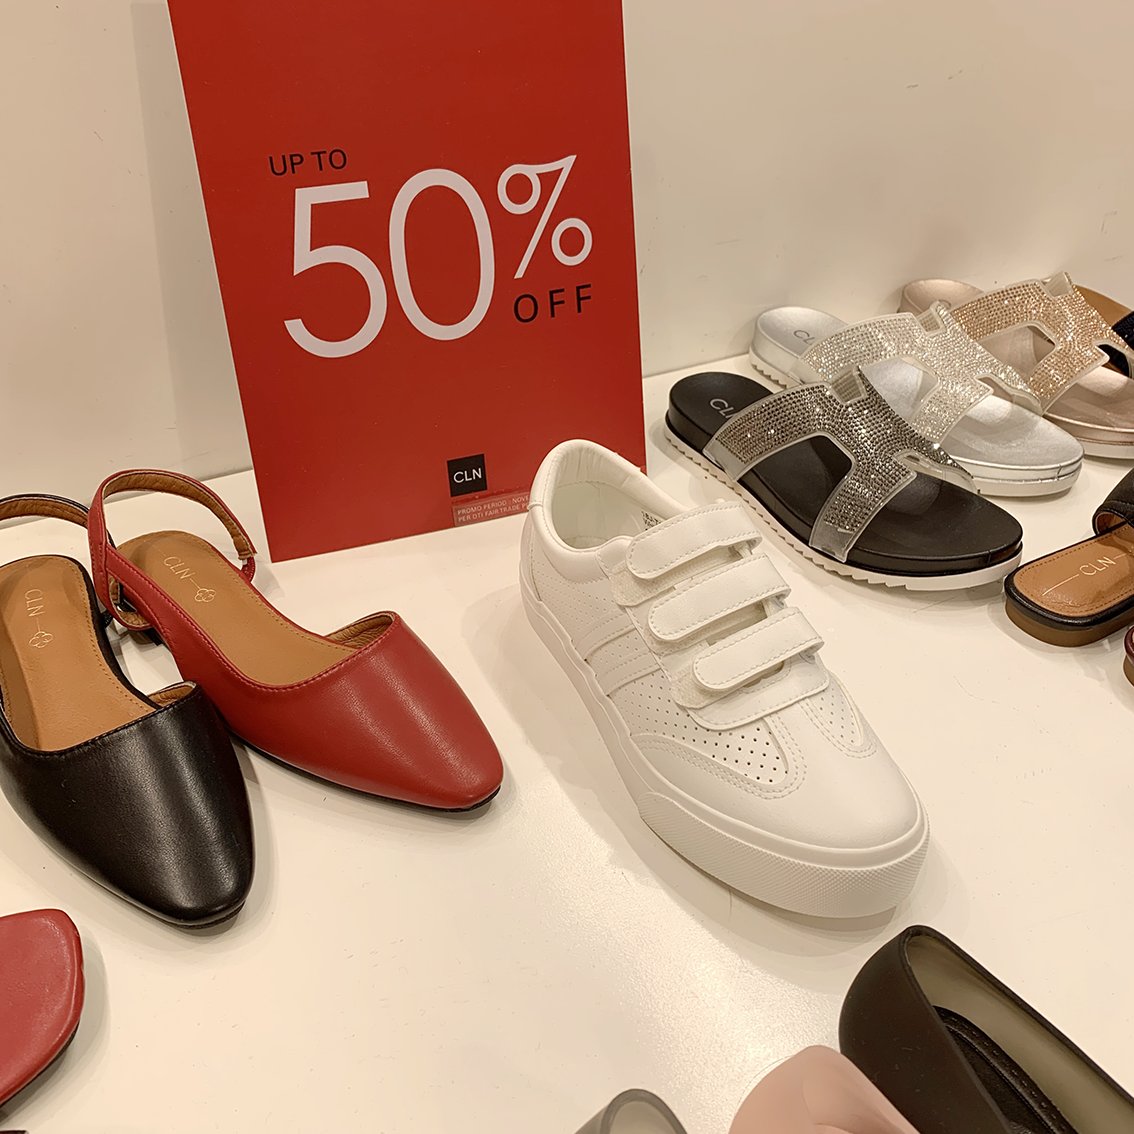 Ayala Malls Abreeza on X: Slip-ons, slingbacks, or sneakers? Take your  pick—they're all on SALE at CLN Abreeza! Get 🎉 UP TO 50% OFF 🎉 on  selected items this January in our